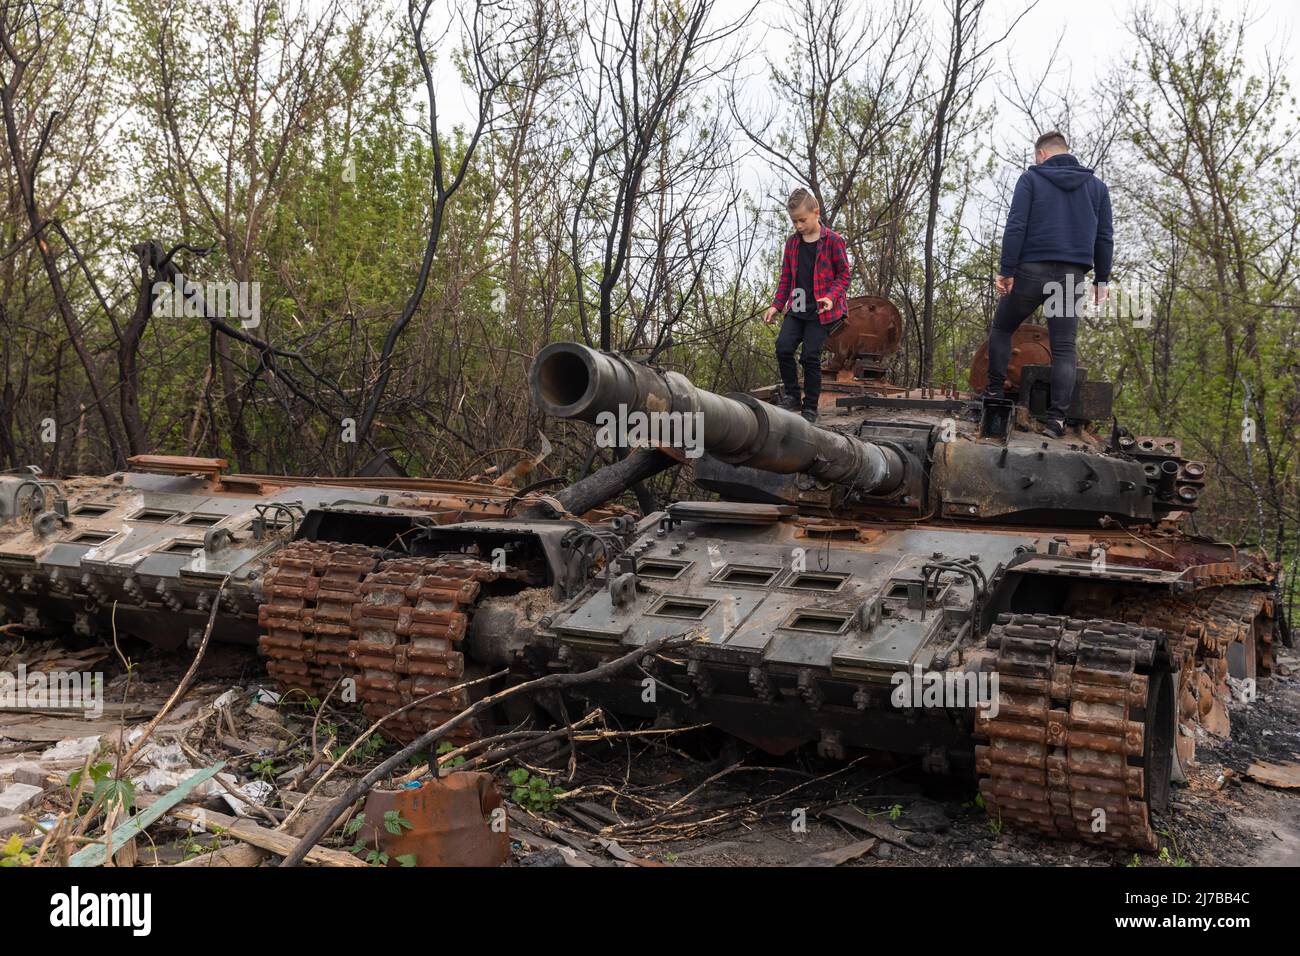 A youth and a boy stand on the tower of a destroyed Russian tank near Makariv village, Kyiv region. Russia invaded Ukraine on 24 February 2022, triggering the largest military attack in Europe since World War II. Stock Photo